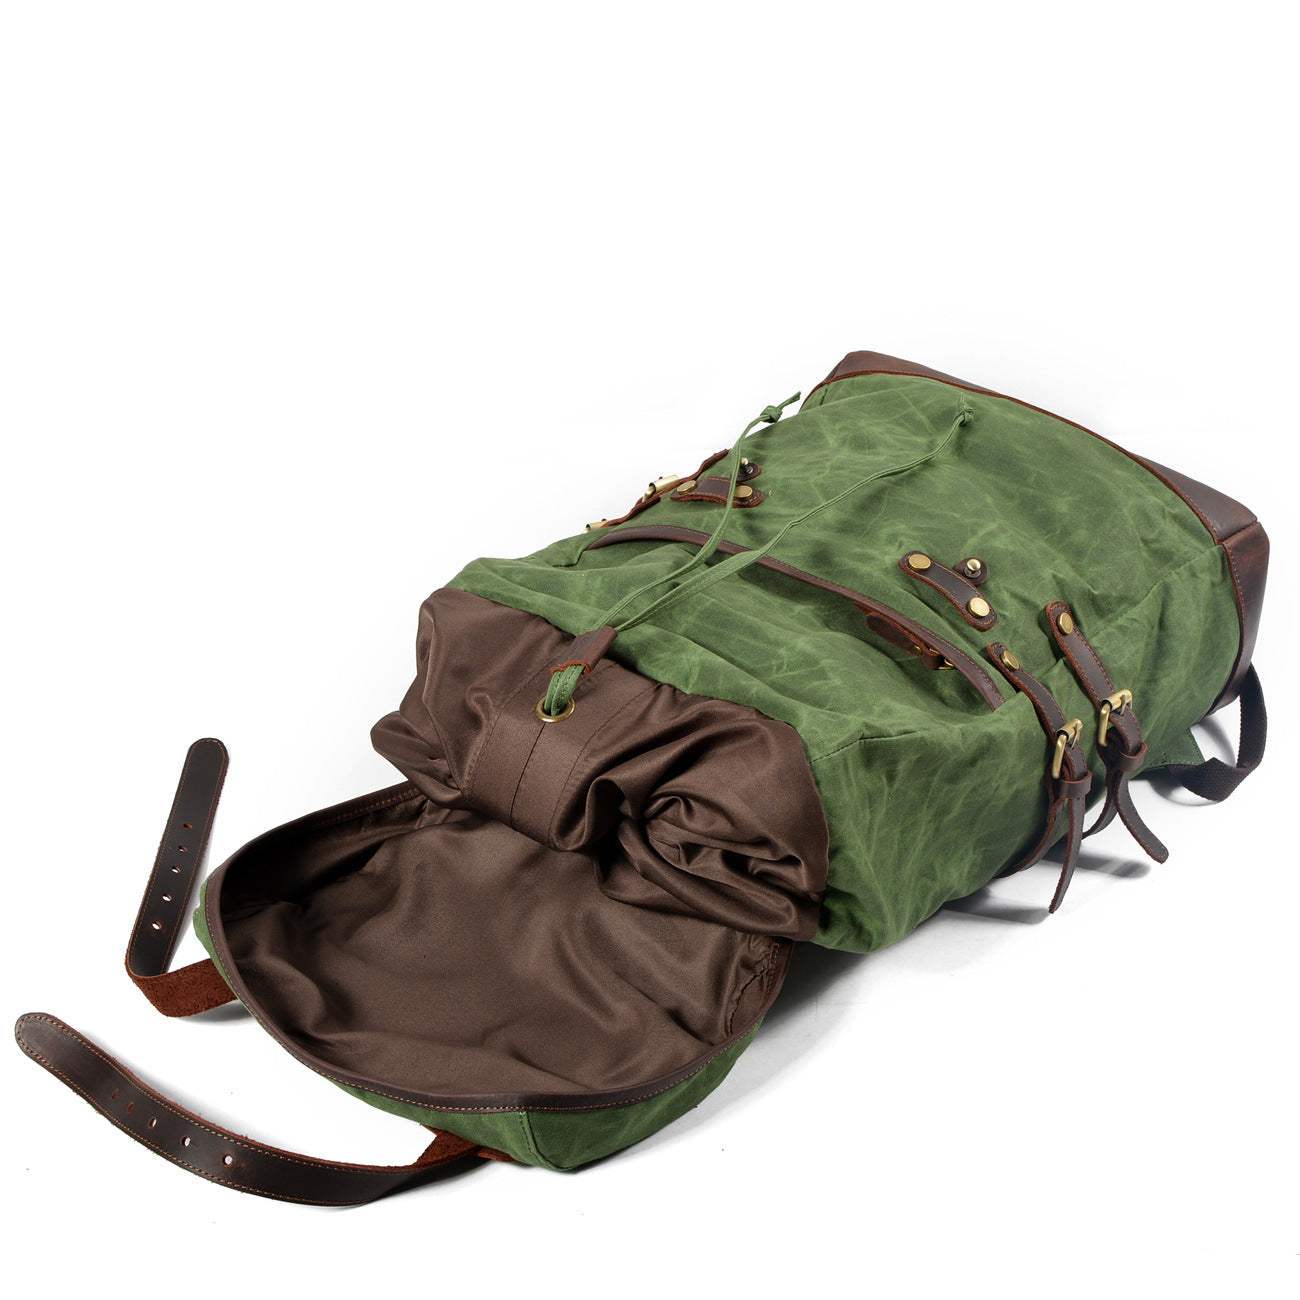 Leisure Leather Canvas Hiking Backpack 9159-Leather Canvas Backpack-Green-Free Shipping Leatheretro